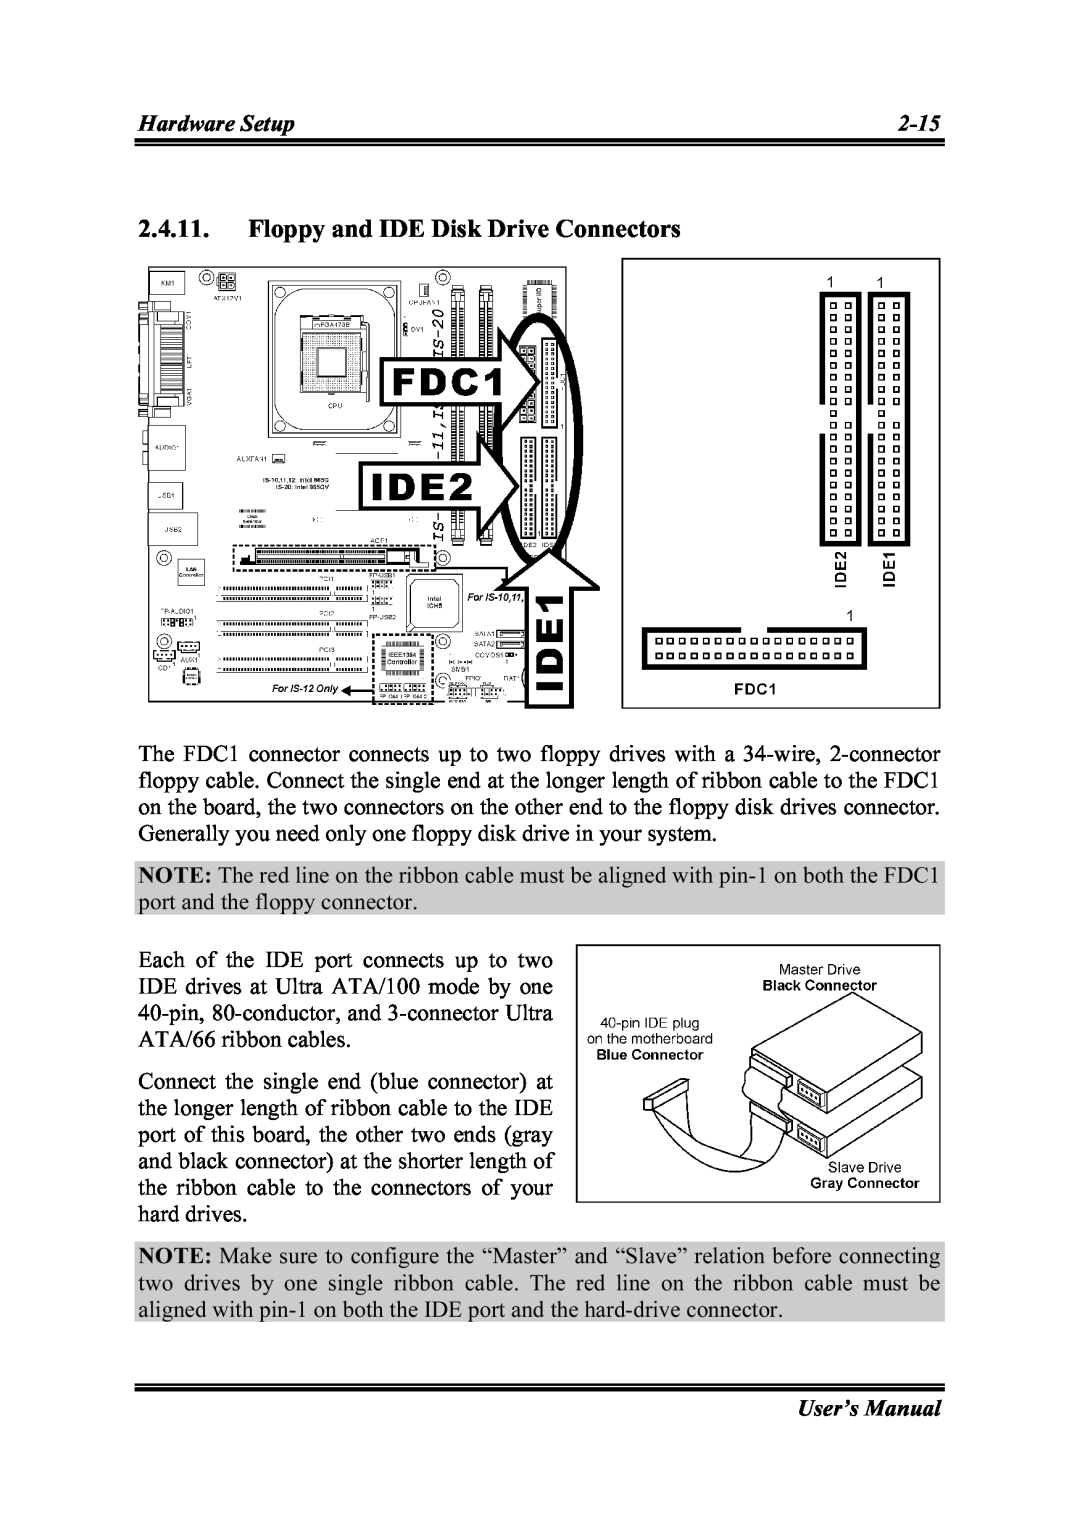 Abit IS-11, IS-12, IS-20, IS-10 user manual Floppy and IDE Disk Drive Connectors 